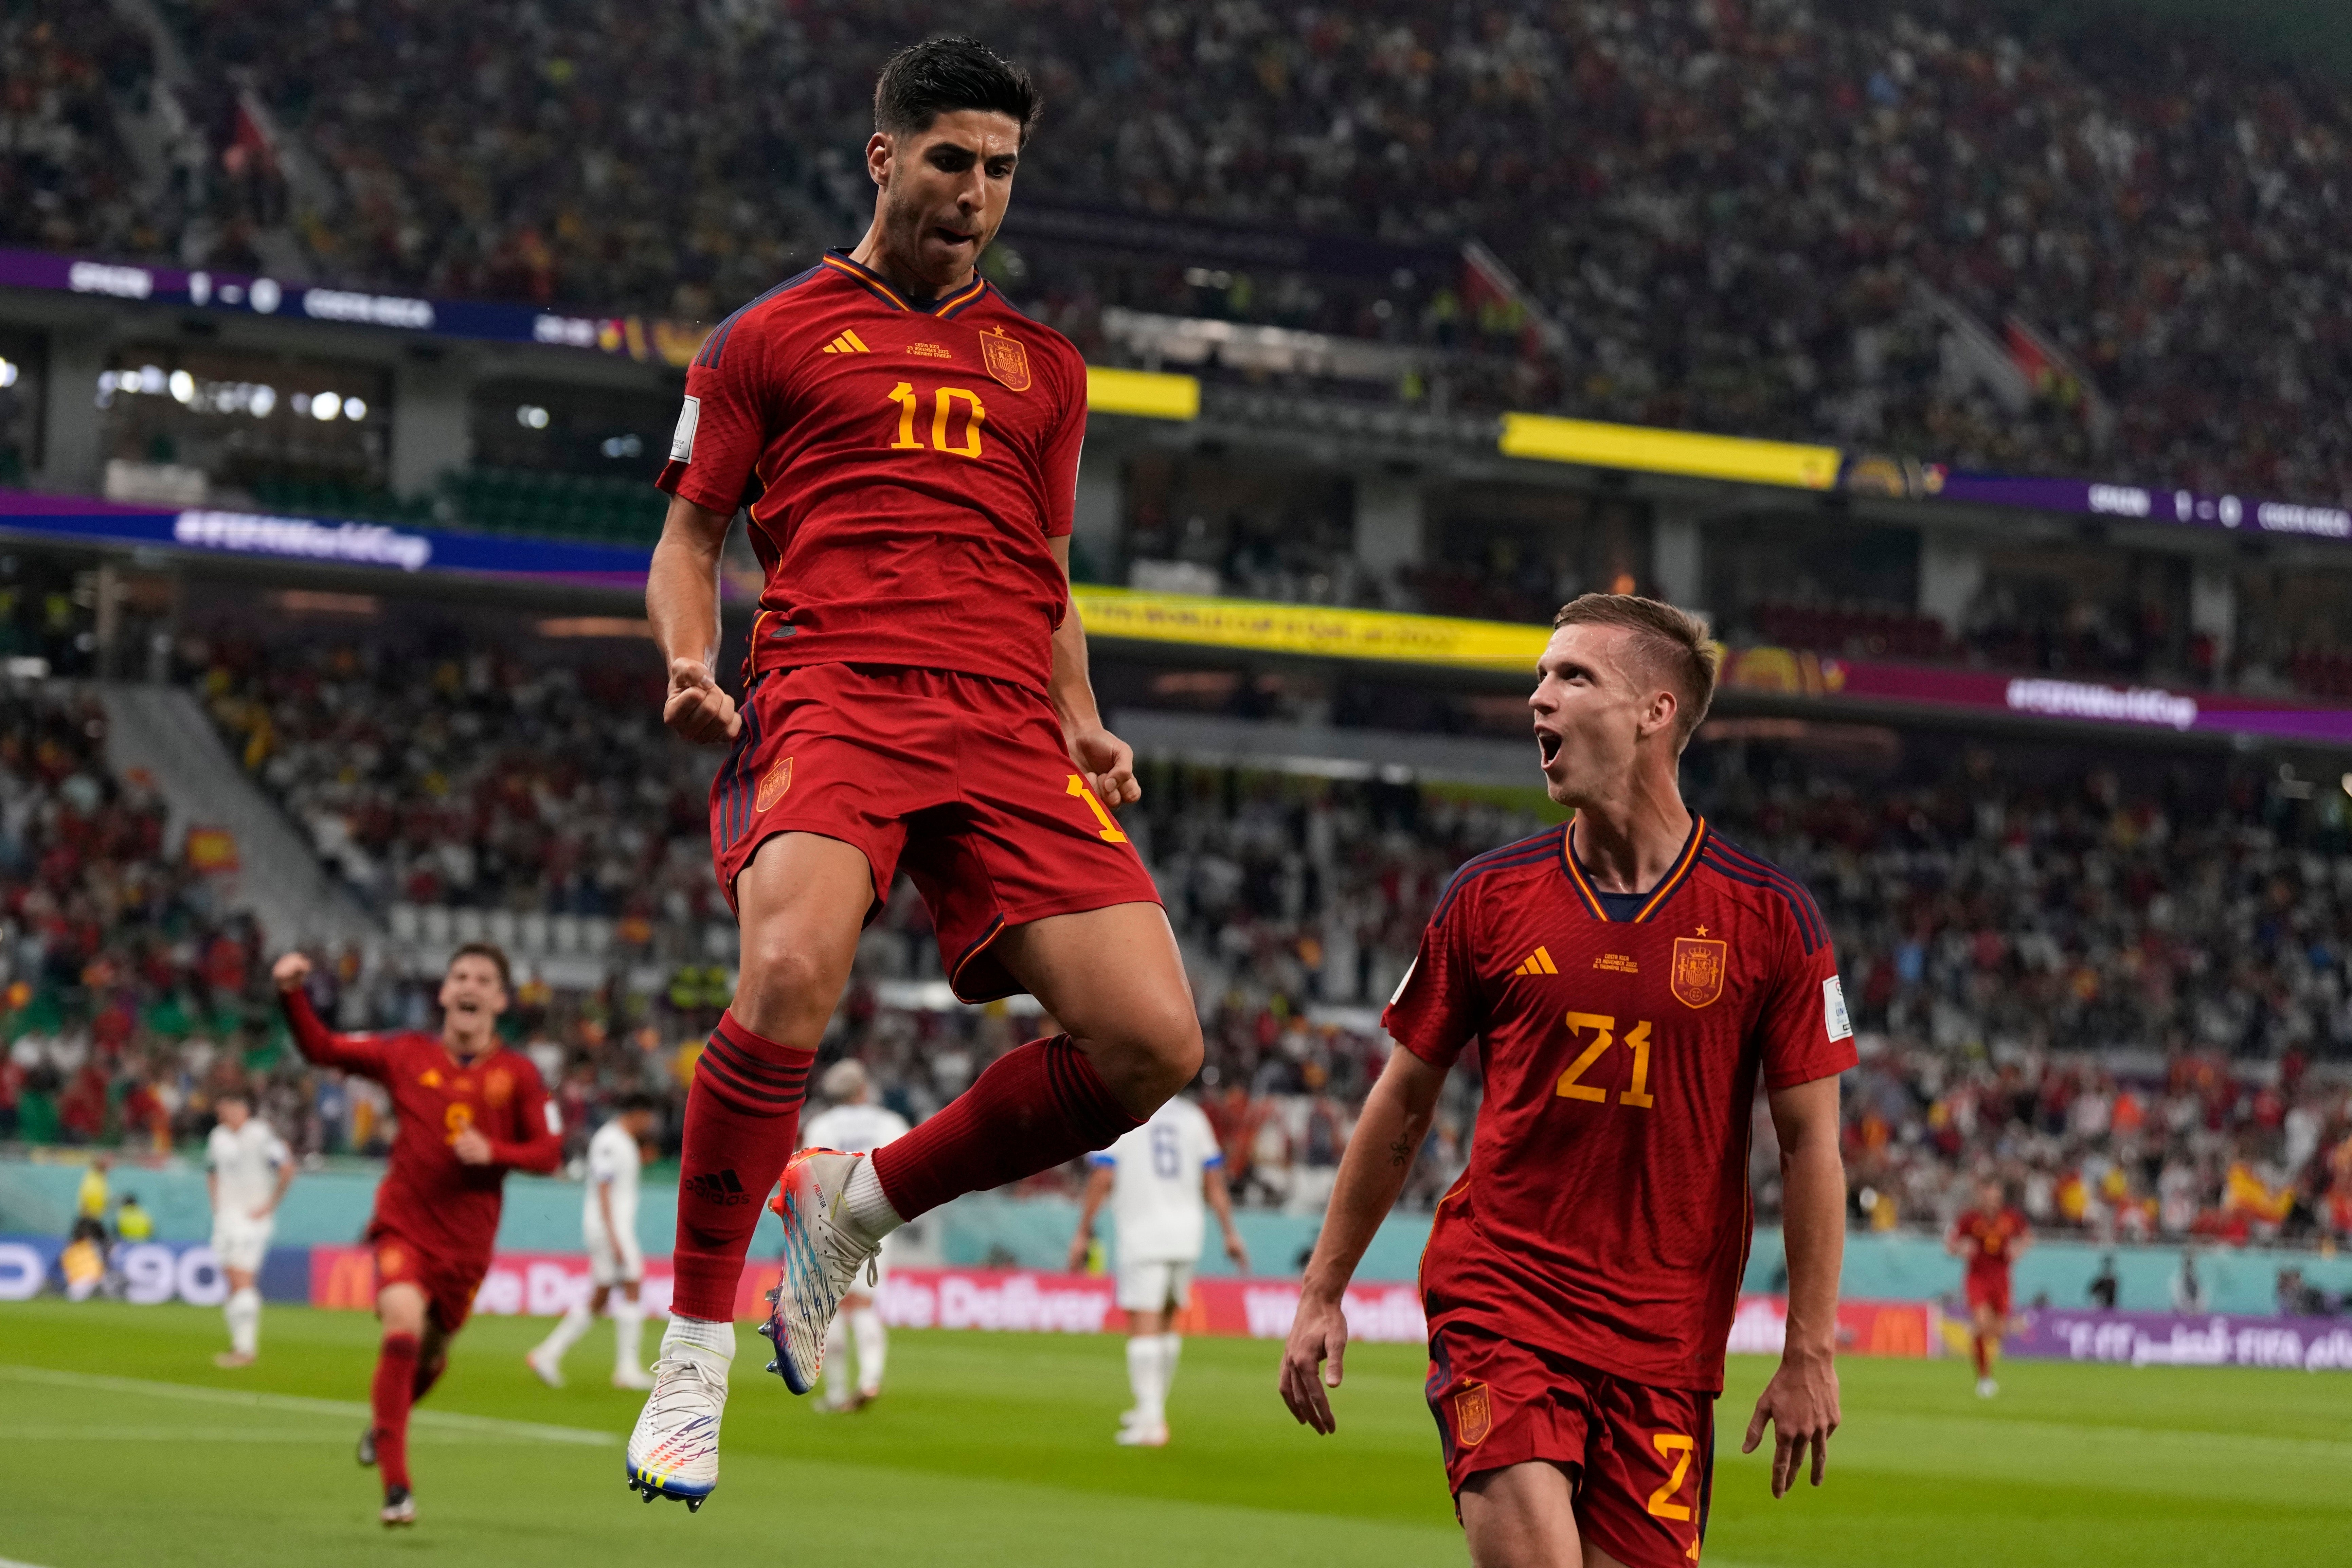 Spain were electric in their tournament opener